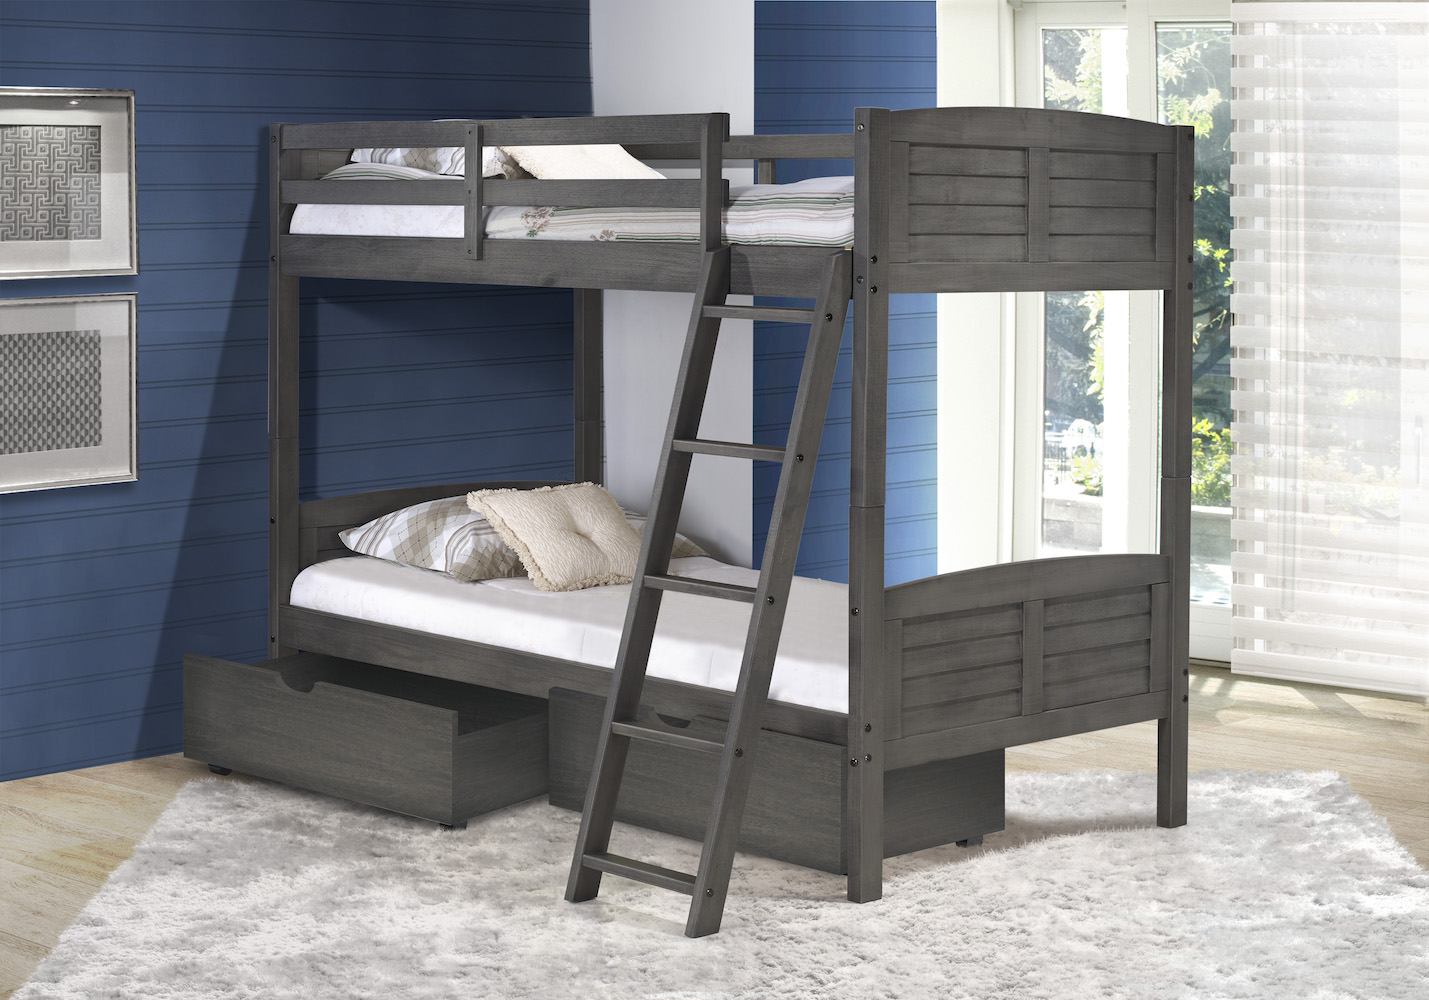 loft bed afterpay